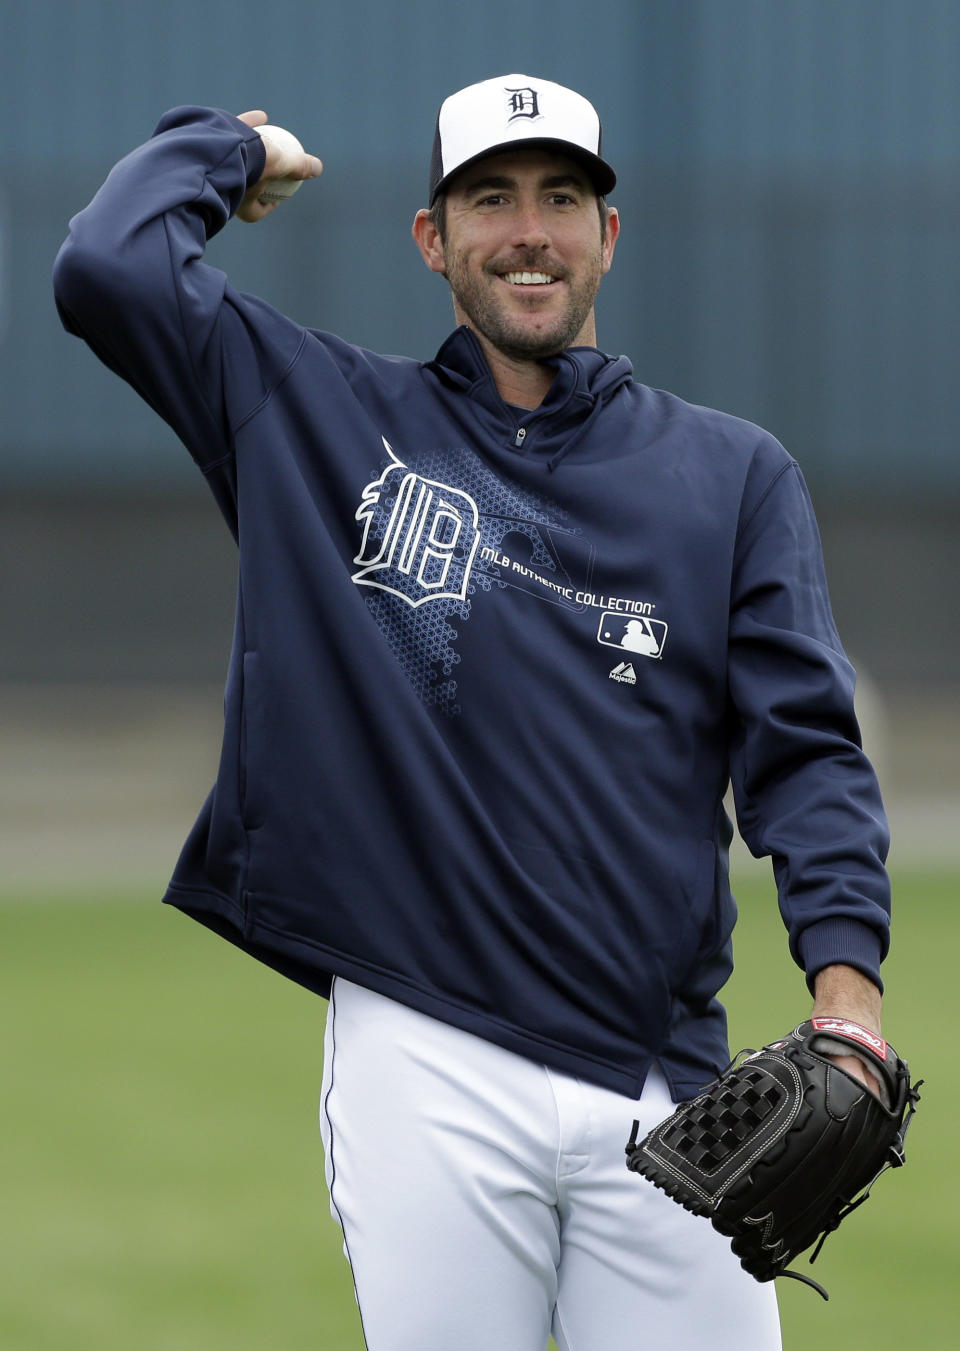 Detroit Tigers starting pitcher Justin Verlander said in a CNN interview: “I don’t think one of our players would be scared to come out. We got 25 guys, it’s a family, and our goal is to win a World Series," Verlander said in the interview. "What your sexual orientation is, I don’t see how that affects the ultimate goal of our family."